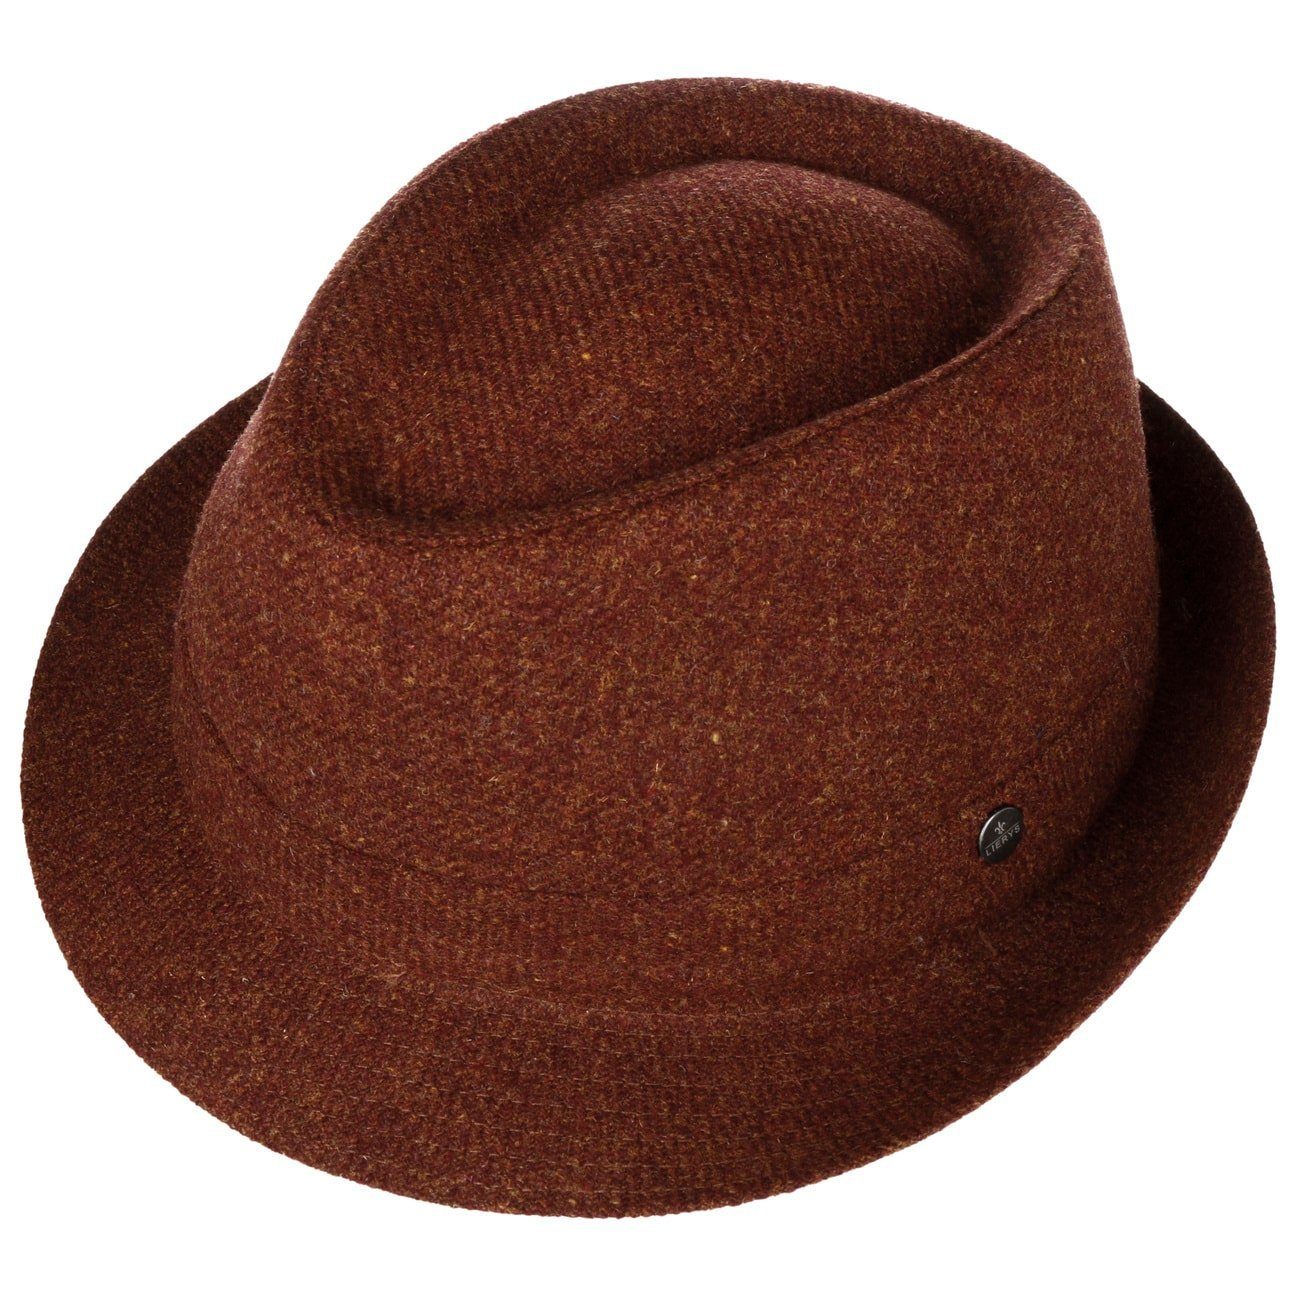 Italy in (1-St) Lierys Futter, mit Trilby rost Wolltrilby Made